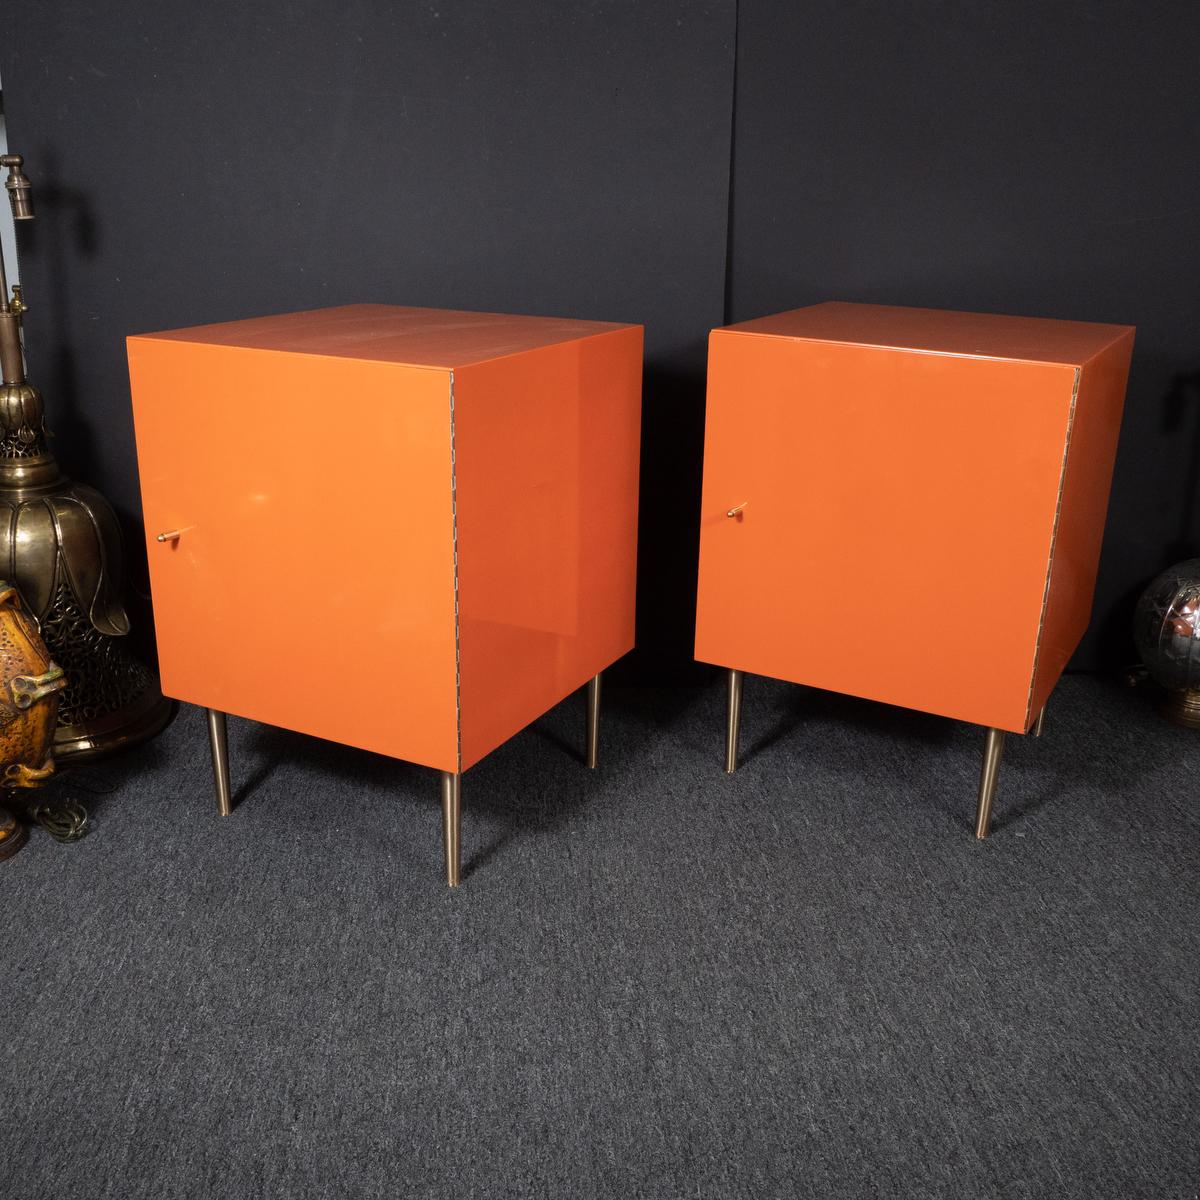 American Pair of Mid-Century Modern Cubic Orange Cabinets For Sale